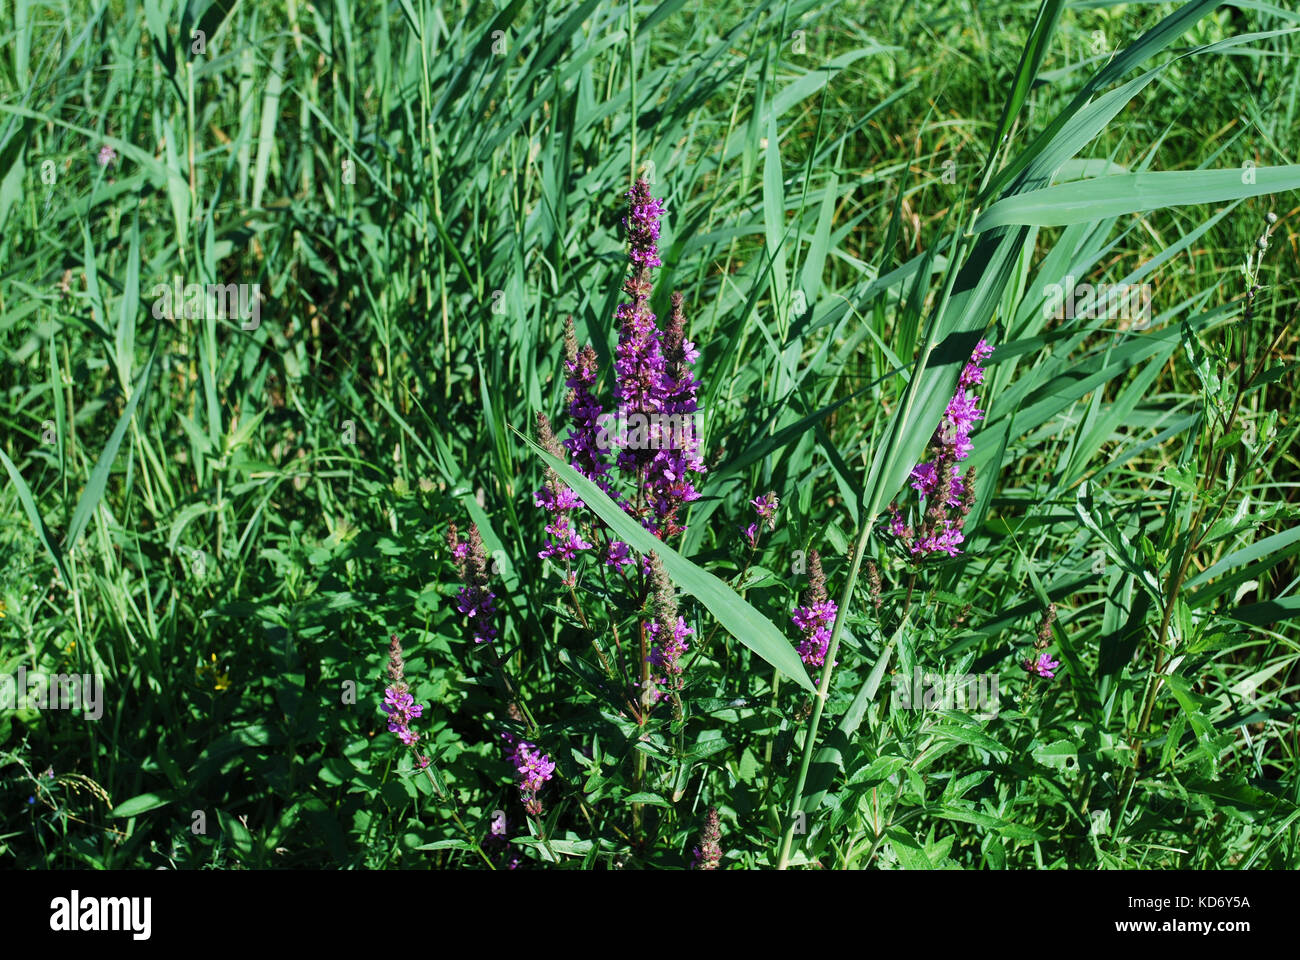 Lythrum salicaria (purple loosestrife) is a flowering plant belonging to the family Lythraceae grow on the meadow. Stock Photo